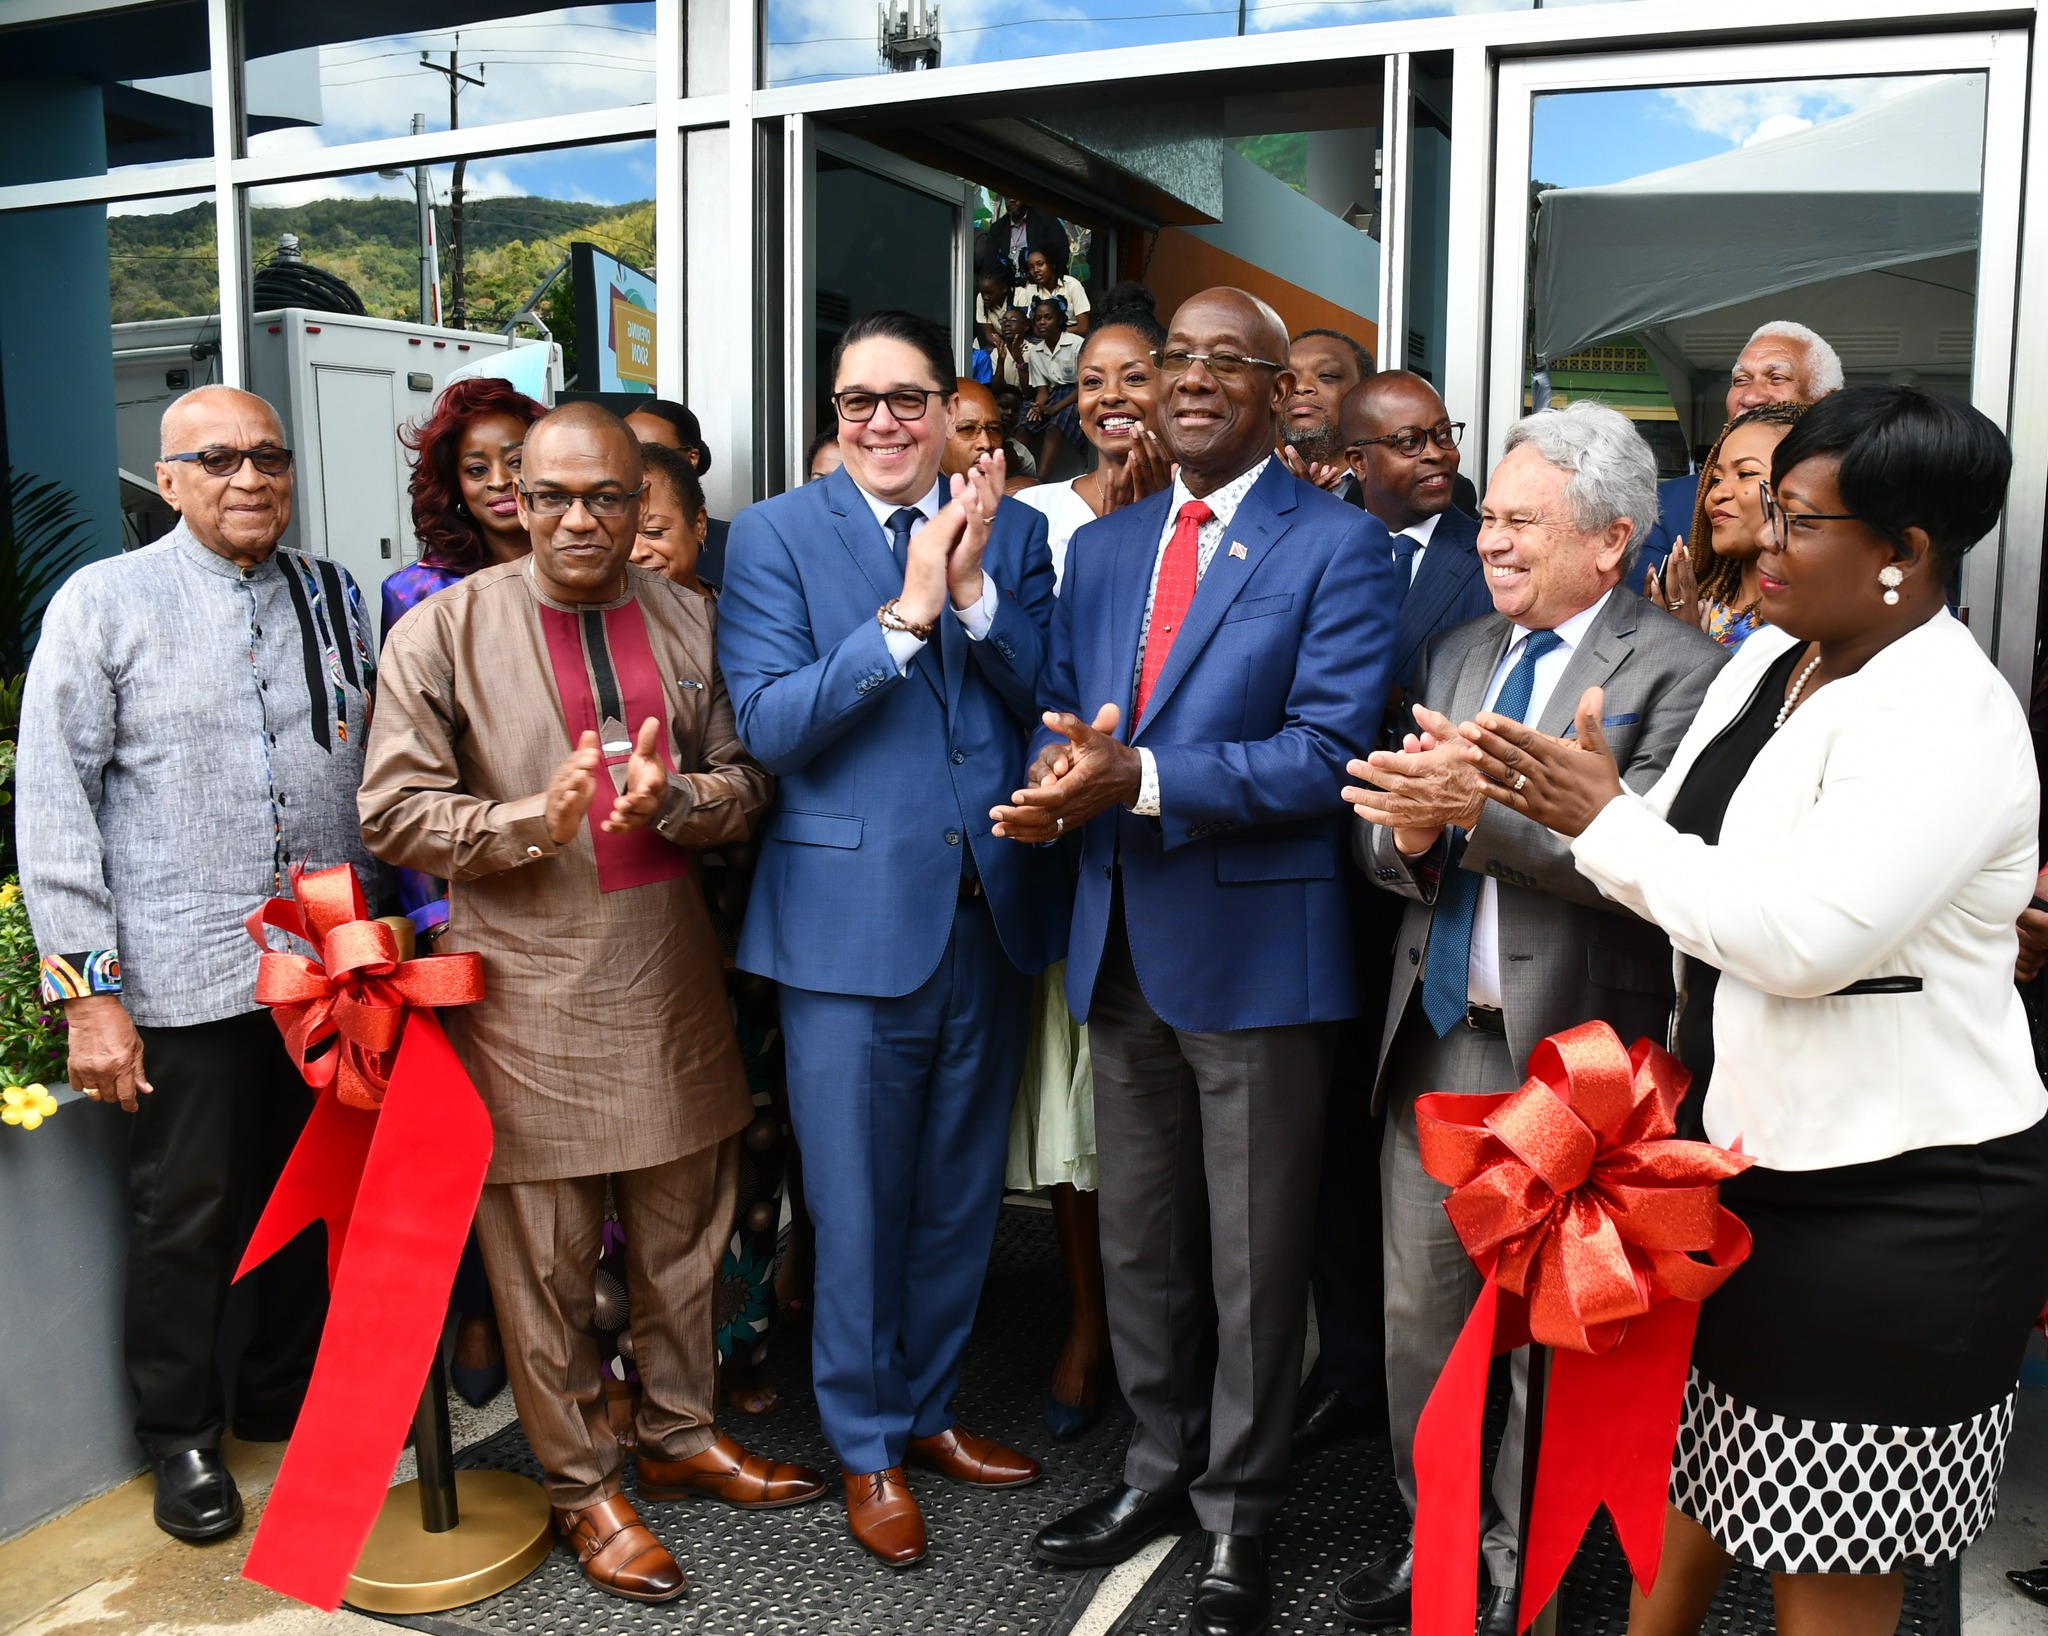 PM encourages citizens to read more as he opens Diego Martin Public Library